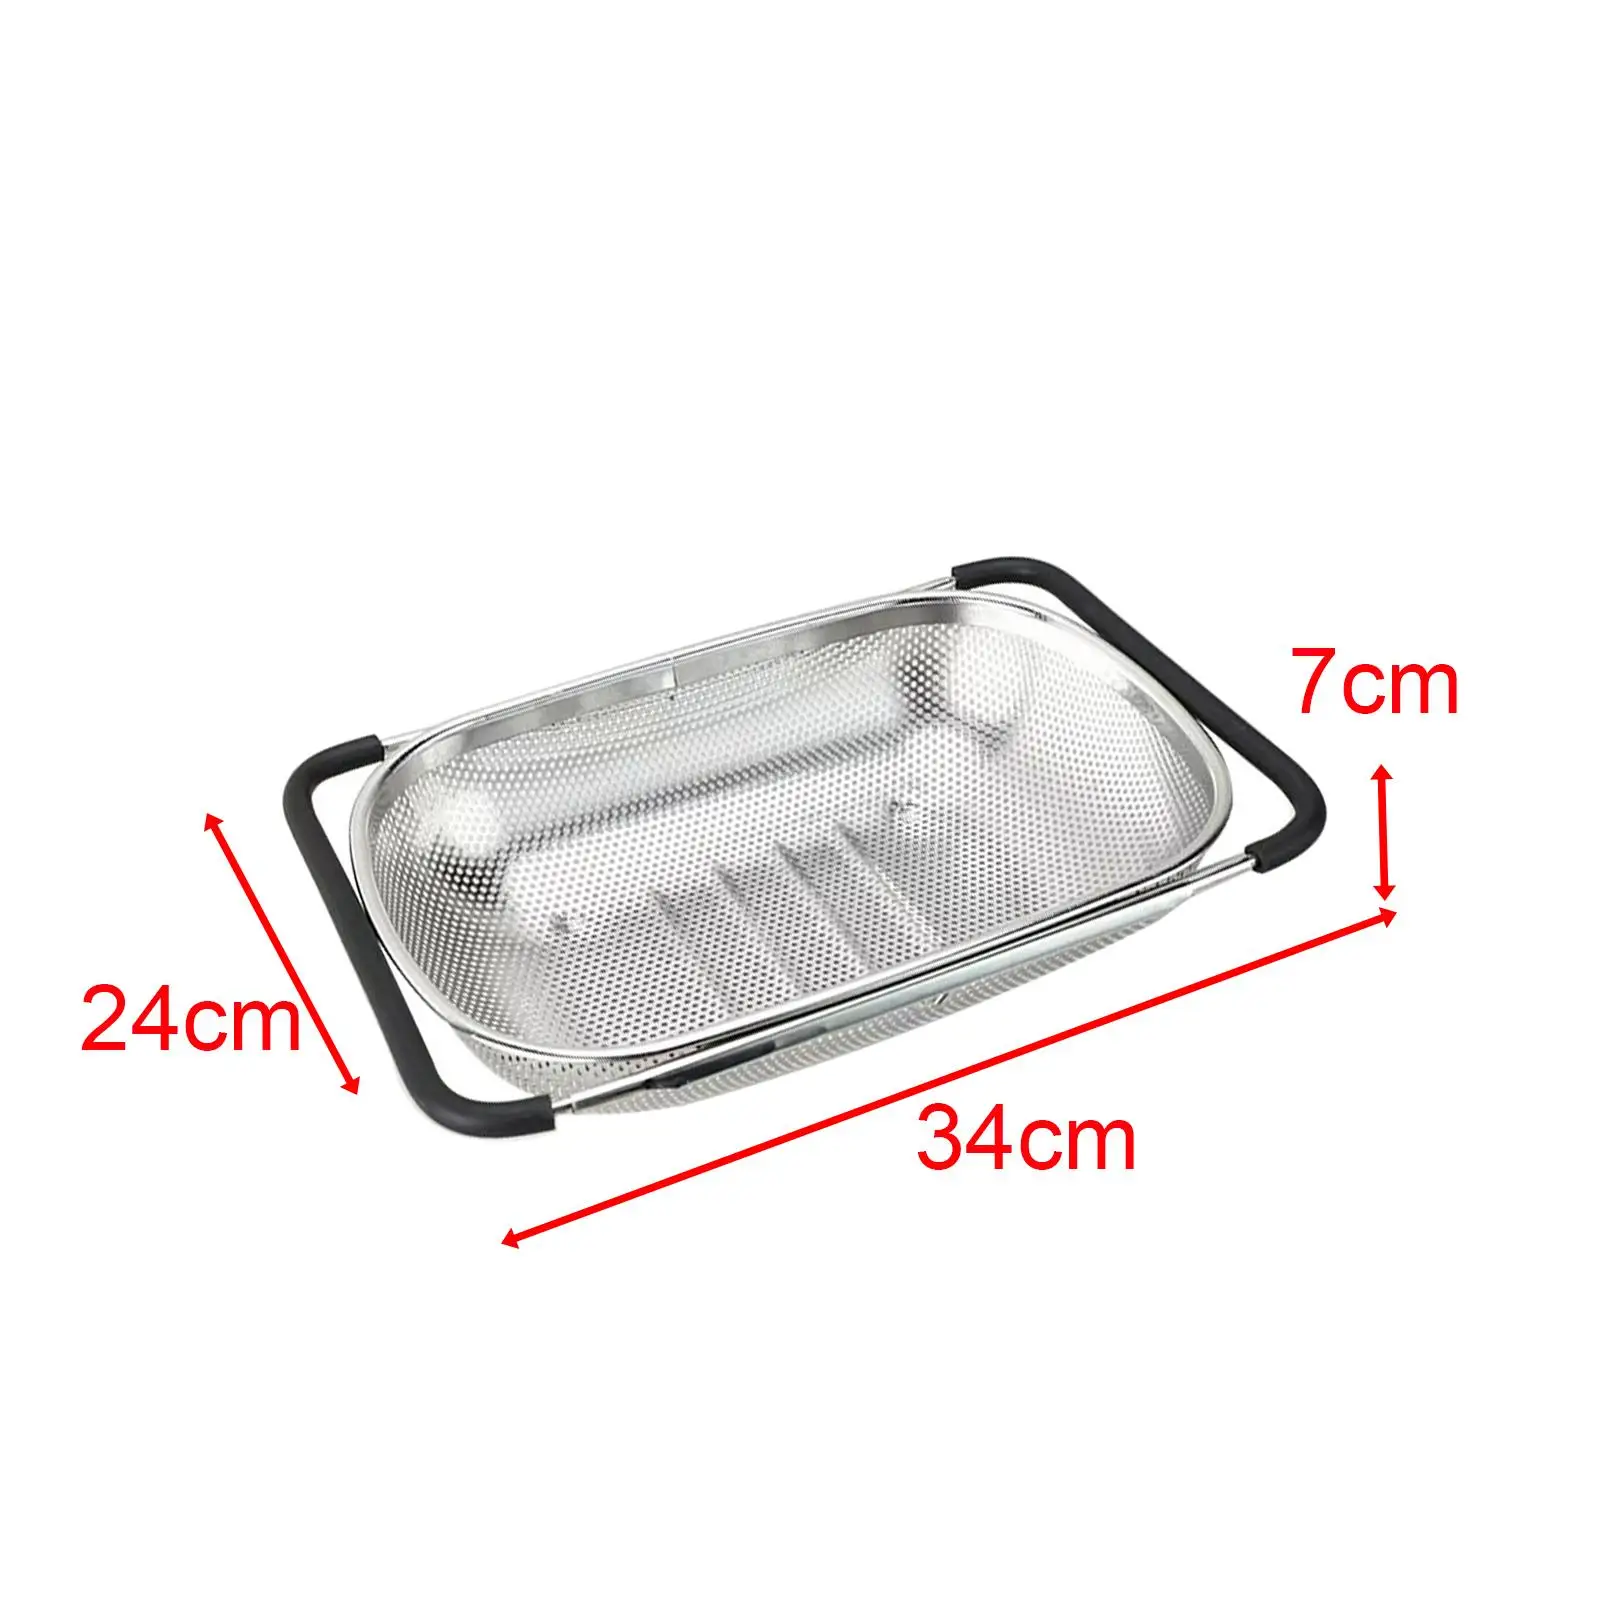 Expandable Stainless Steel Colander/strainer Oval for Food Preparation Safety Silicone Handle over The Sink Stainless Steel